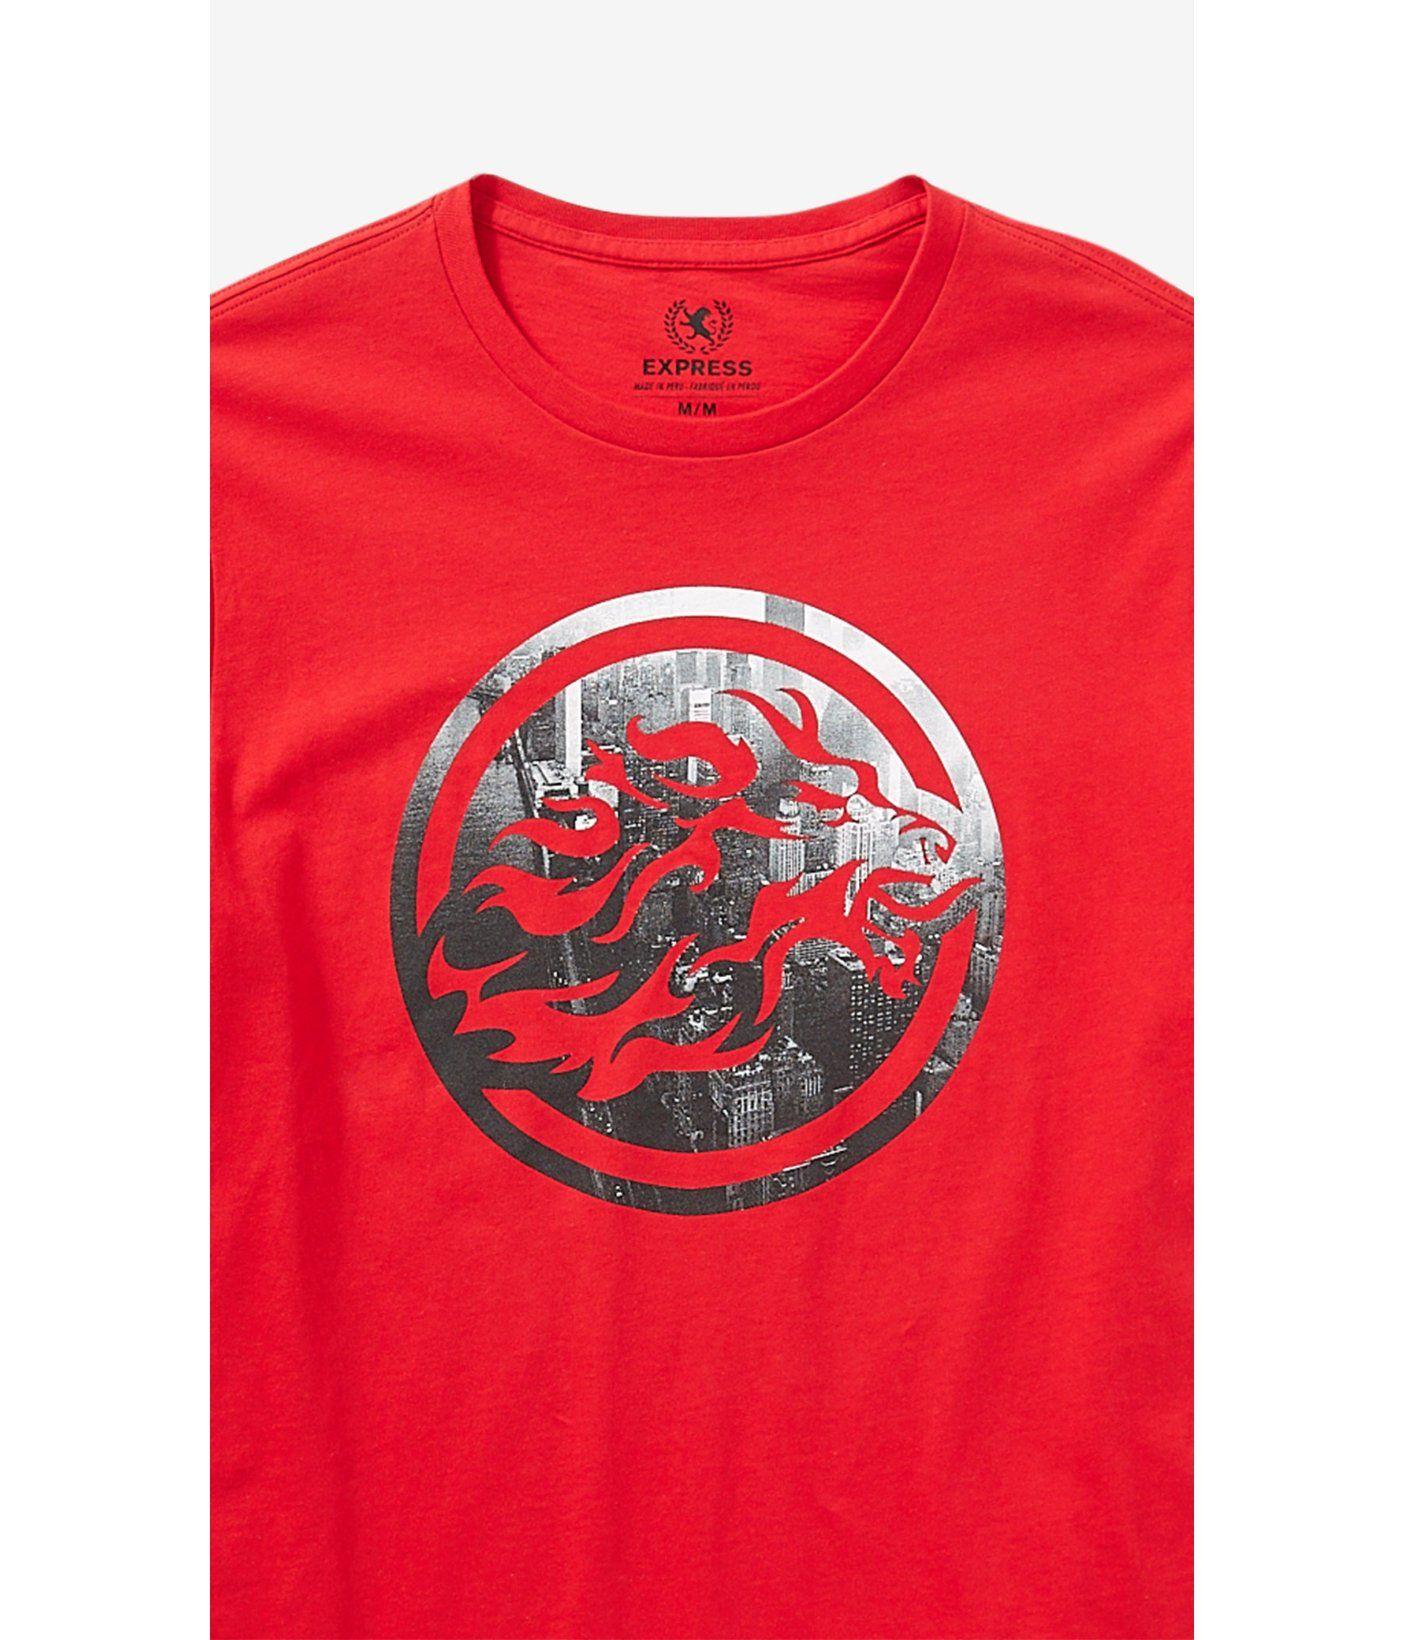 Express Lion Logo - Express City Lion Circular Graphic Tee in Red for Men - Lyst